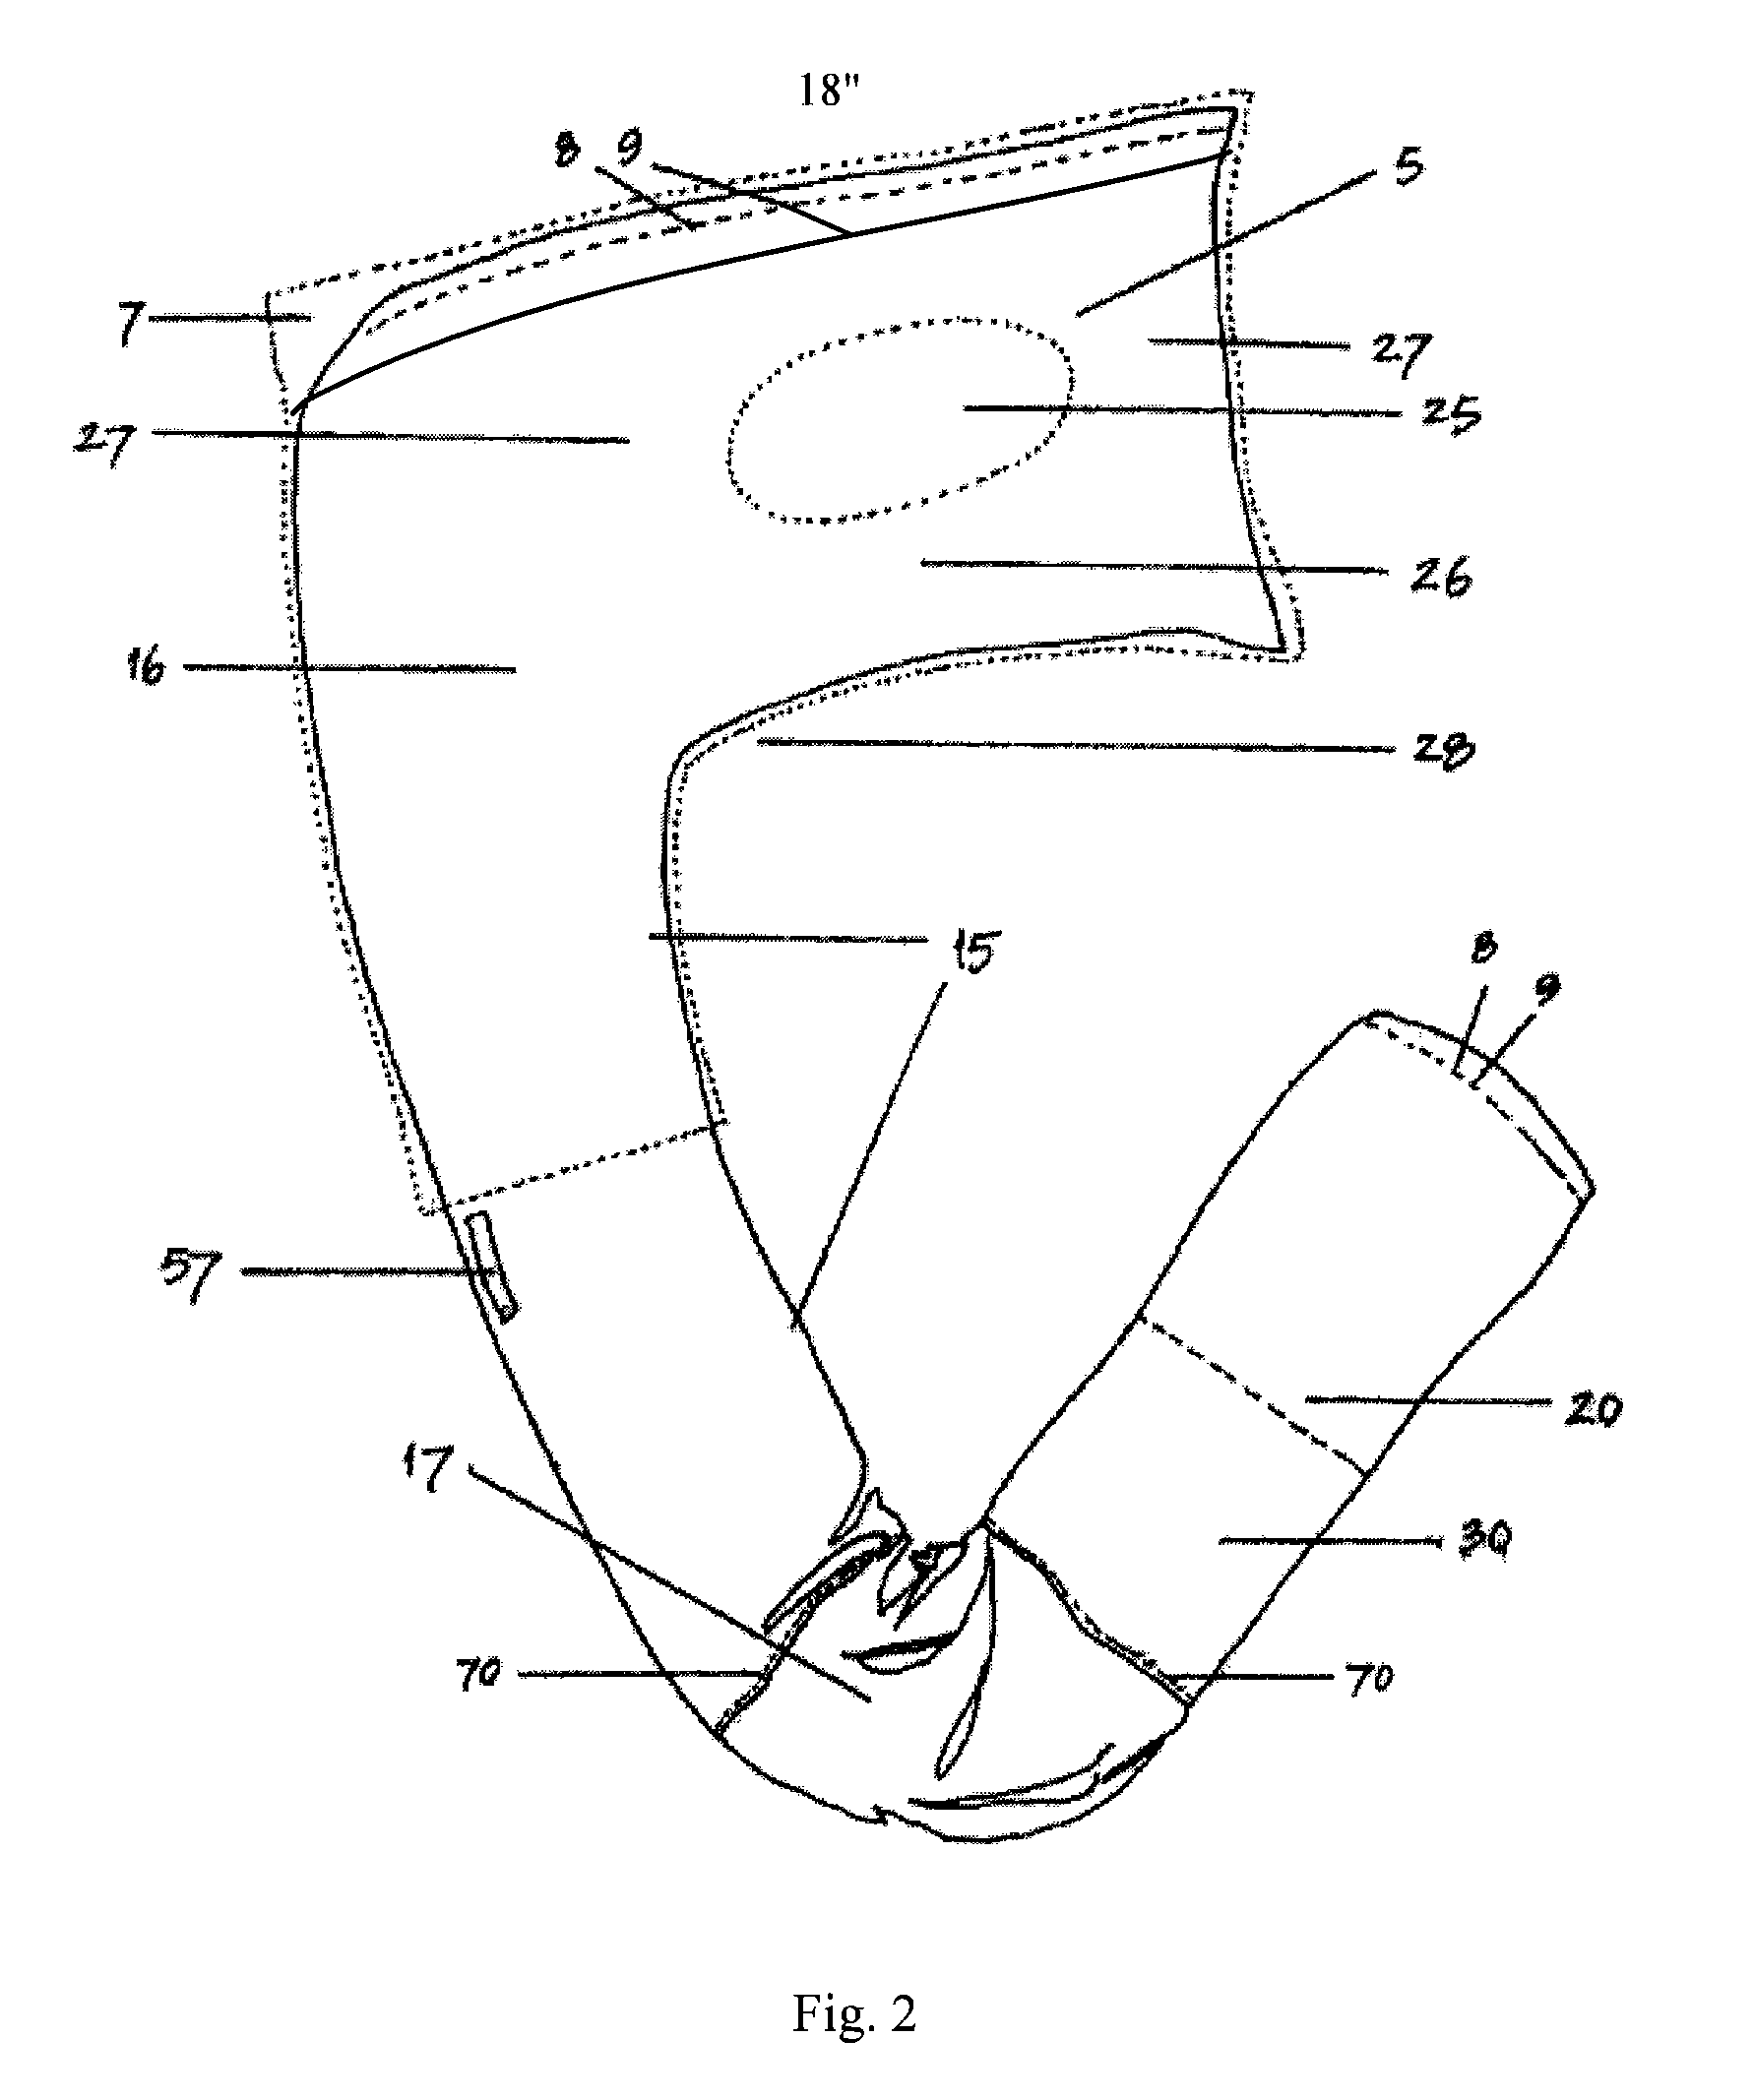 Therapeutic positioning device